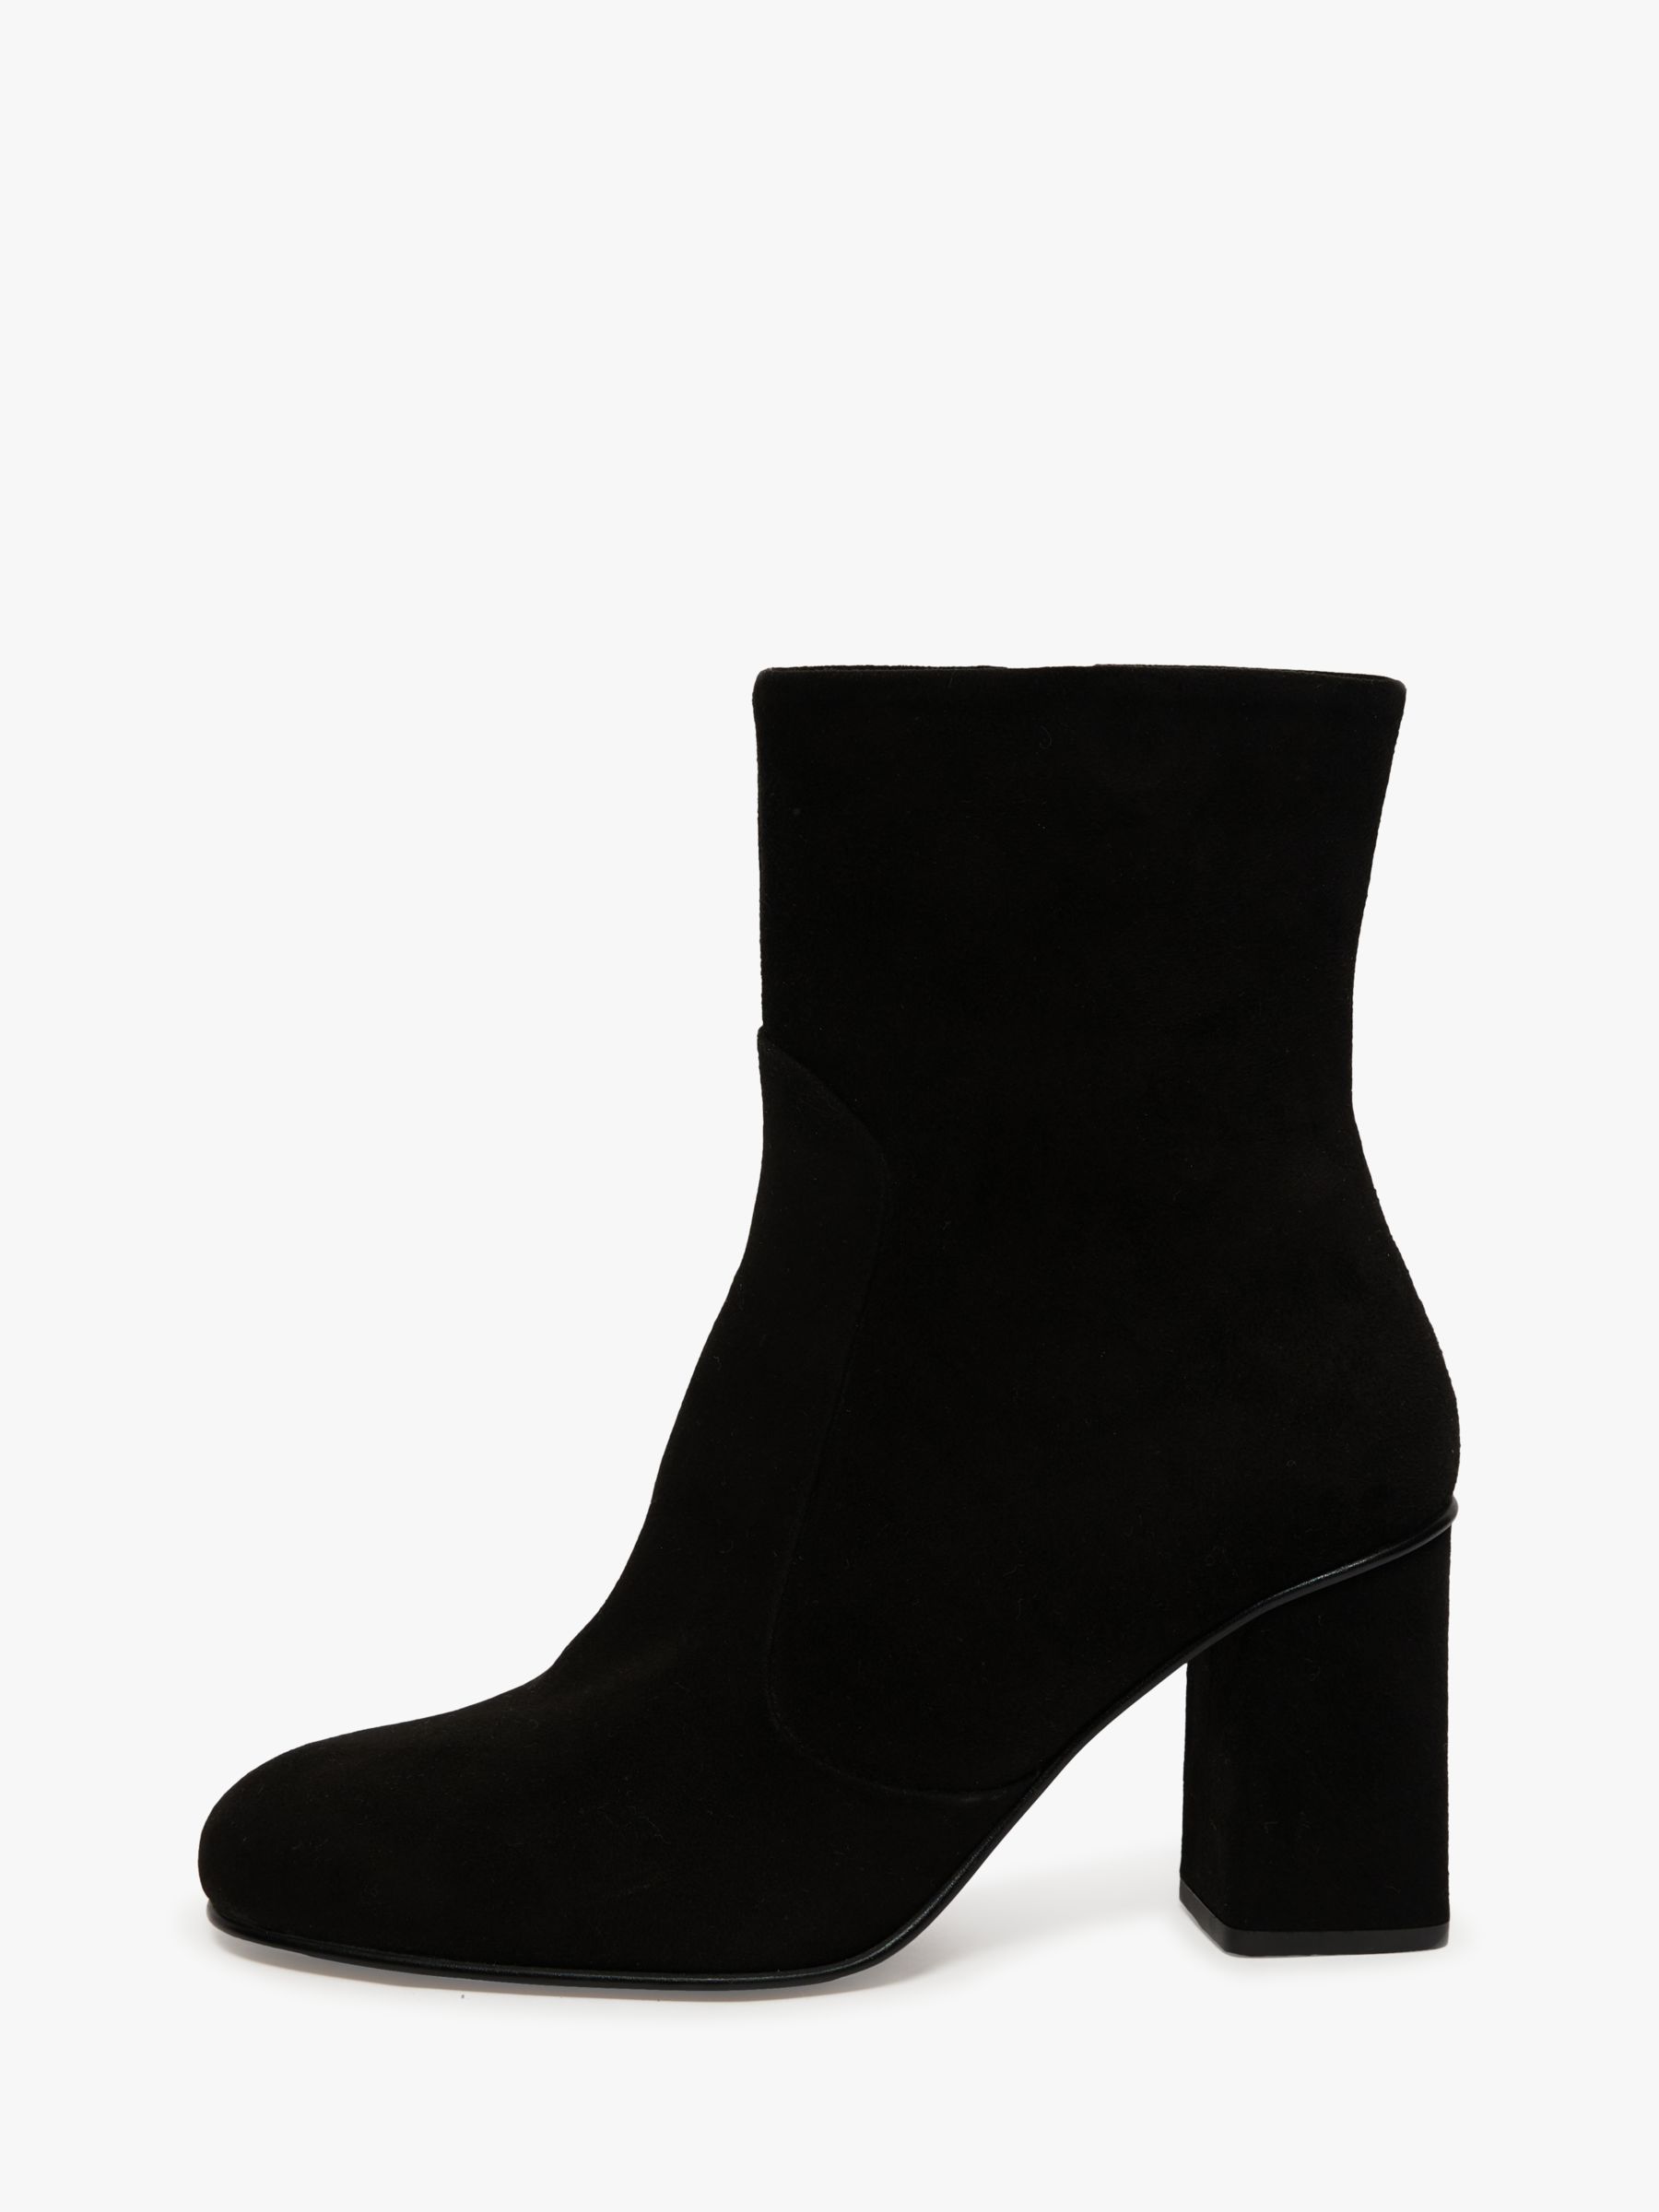 Jigsaw April Suede Heeled Ankle Boots, Black